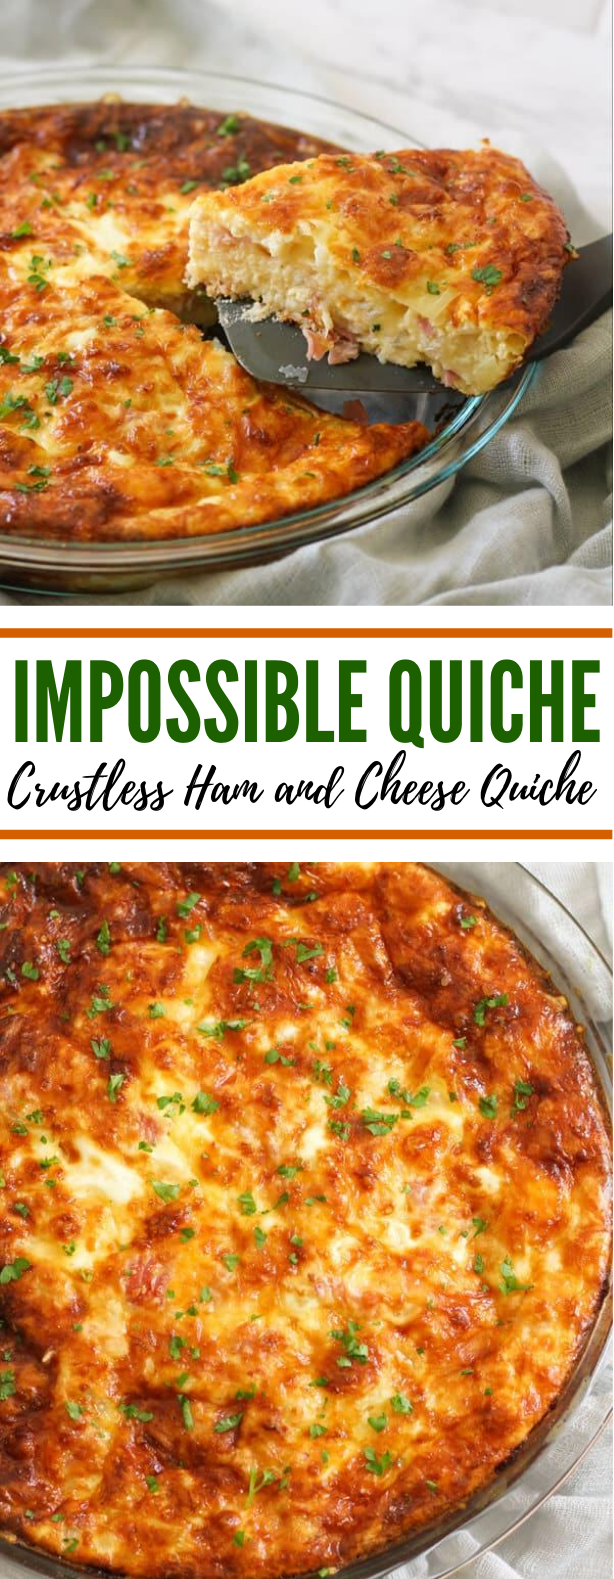 IMPOSSIBLE QUICHE (CRUSTLESS HAM AND CHEESE QUICHE) #dinner #comfortfood #recipes #lunch #meals